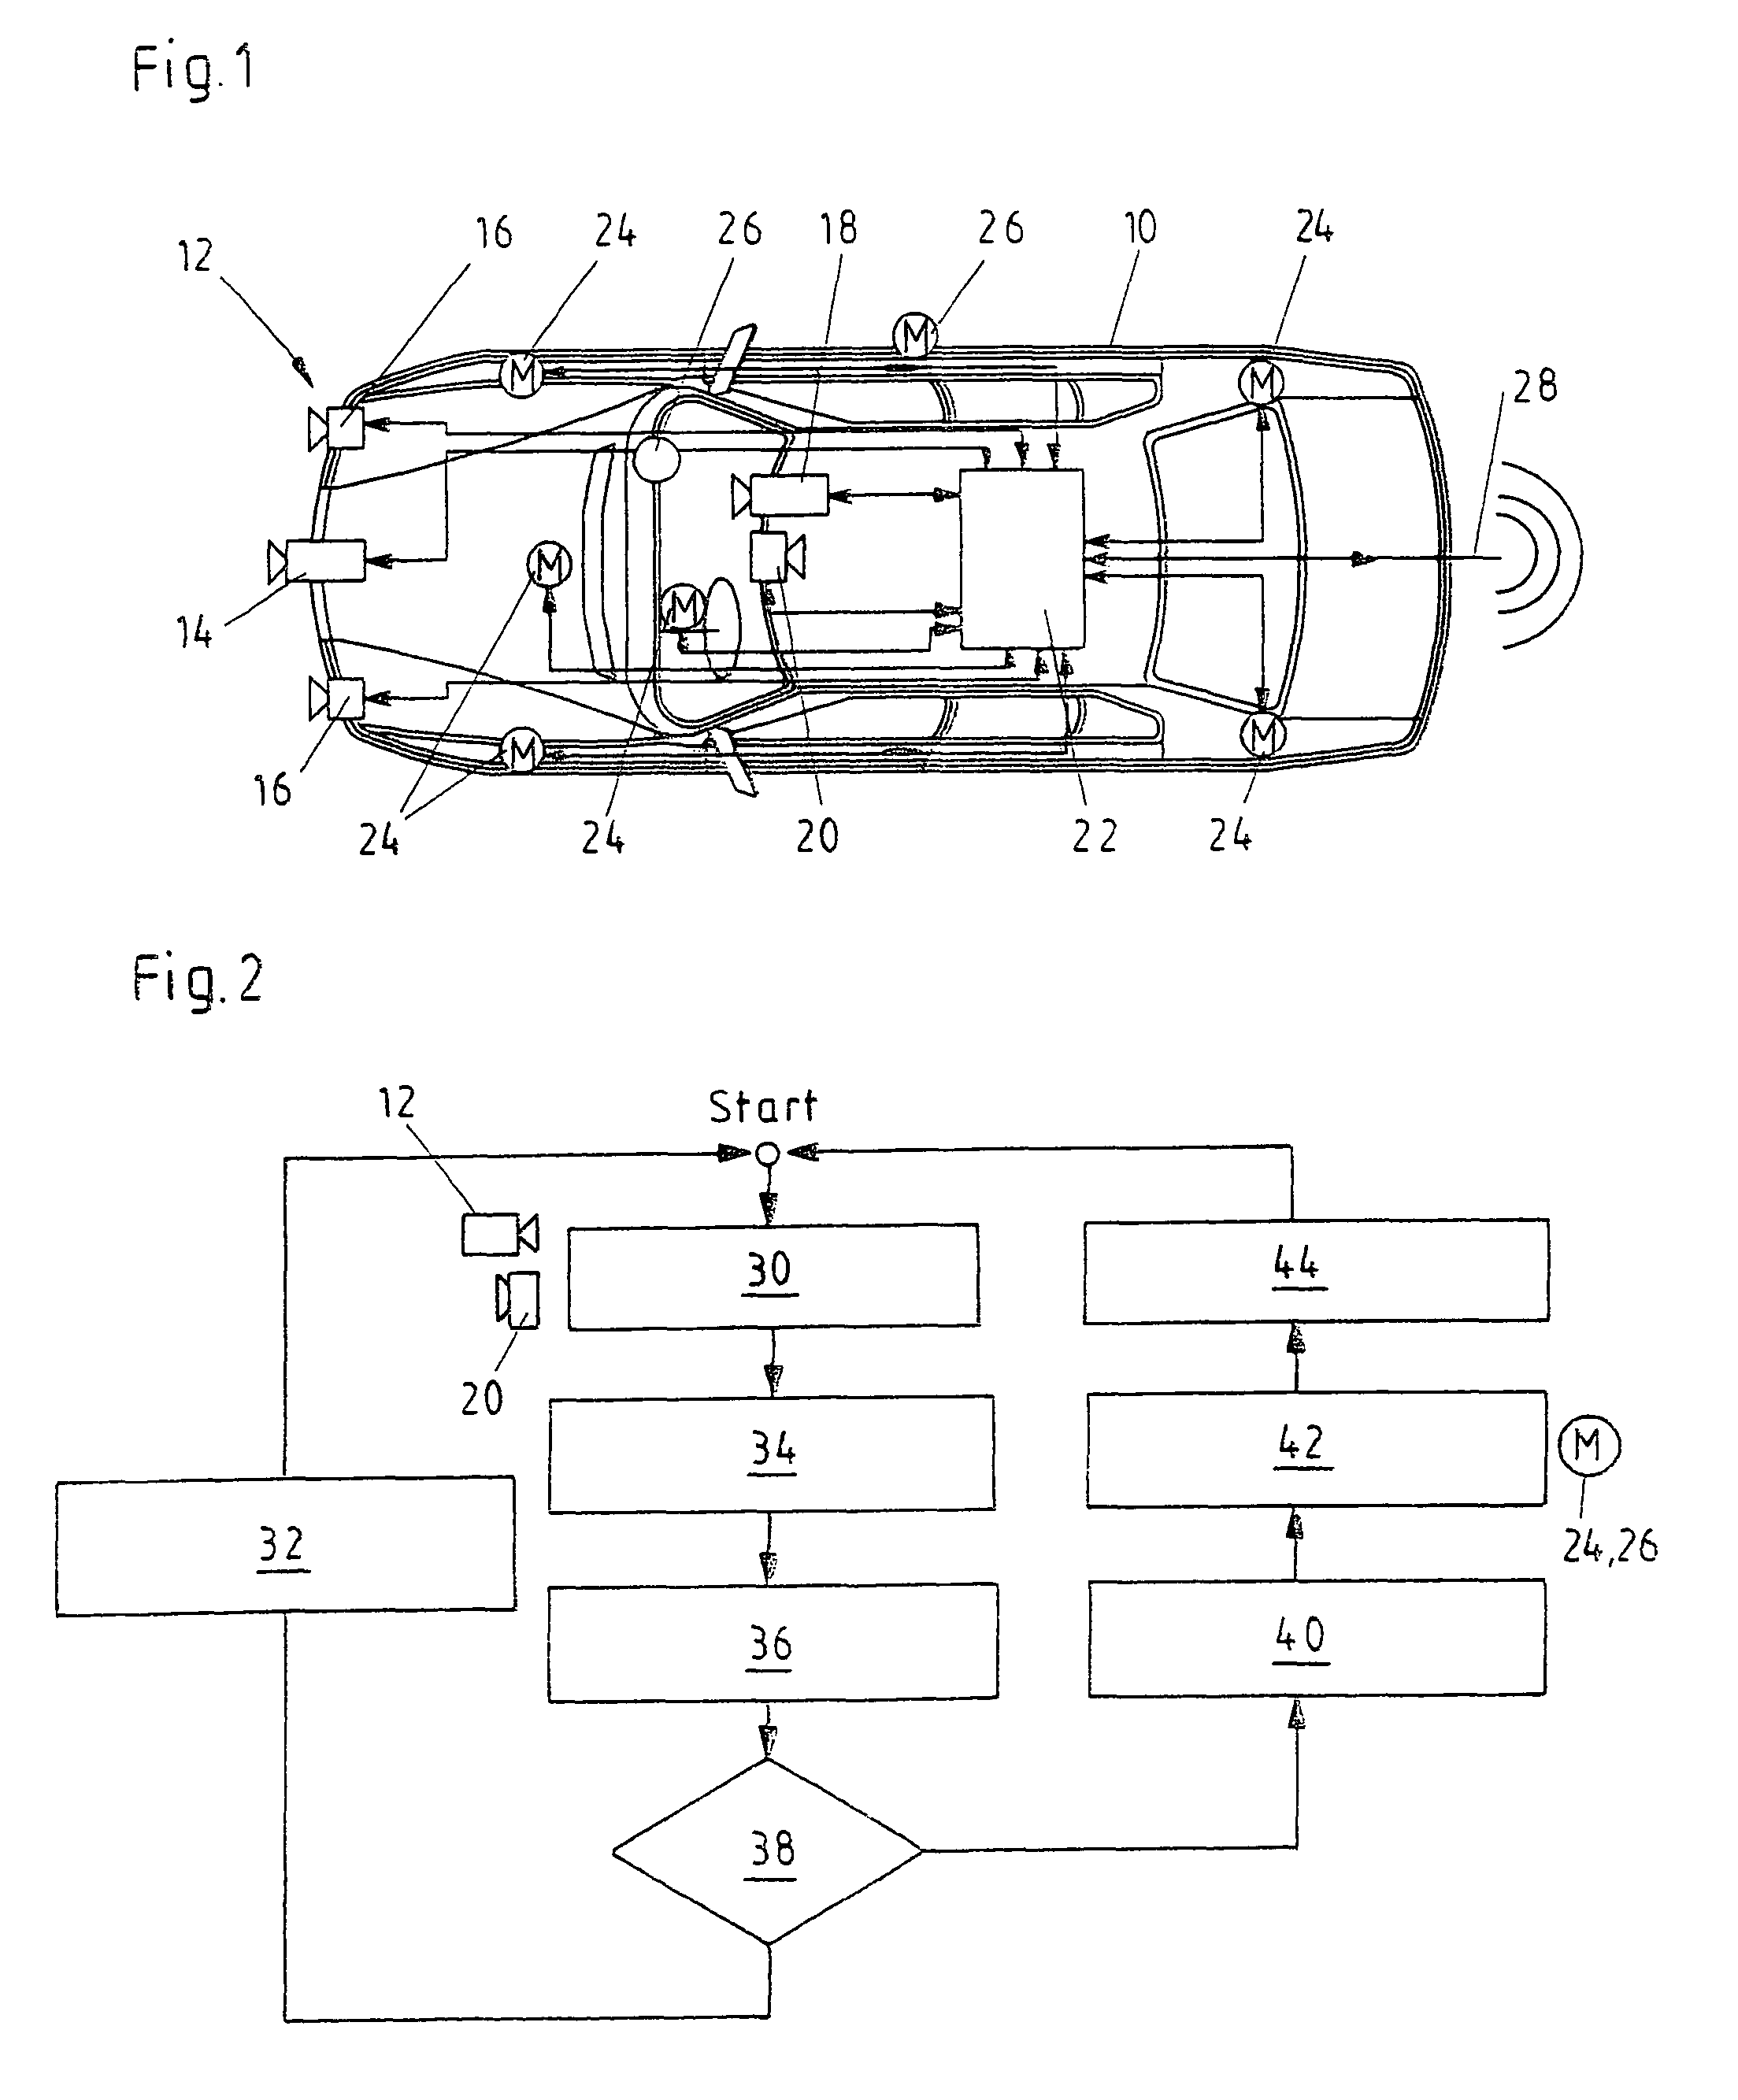 Method and device for influencing at least one parameter on a vehicle